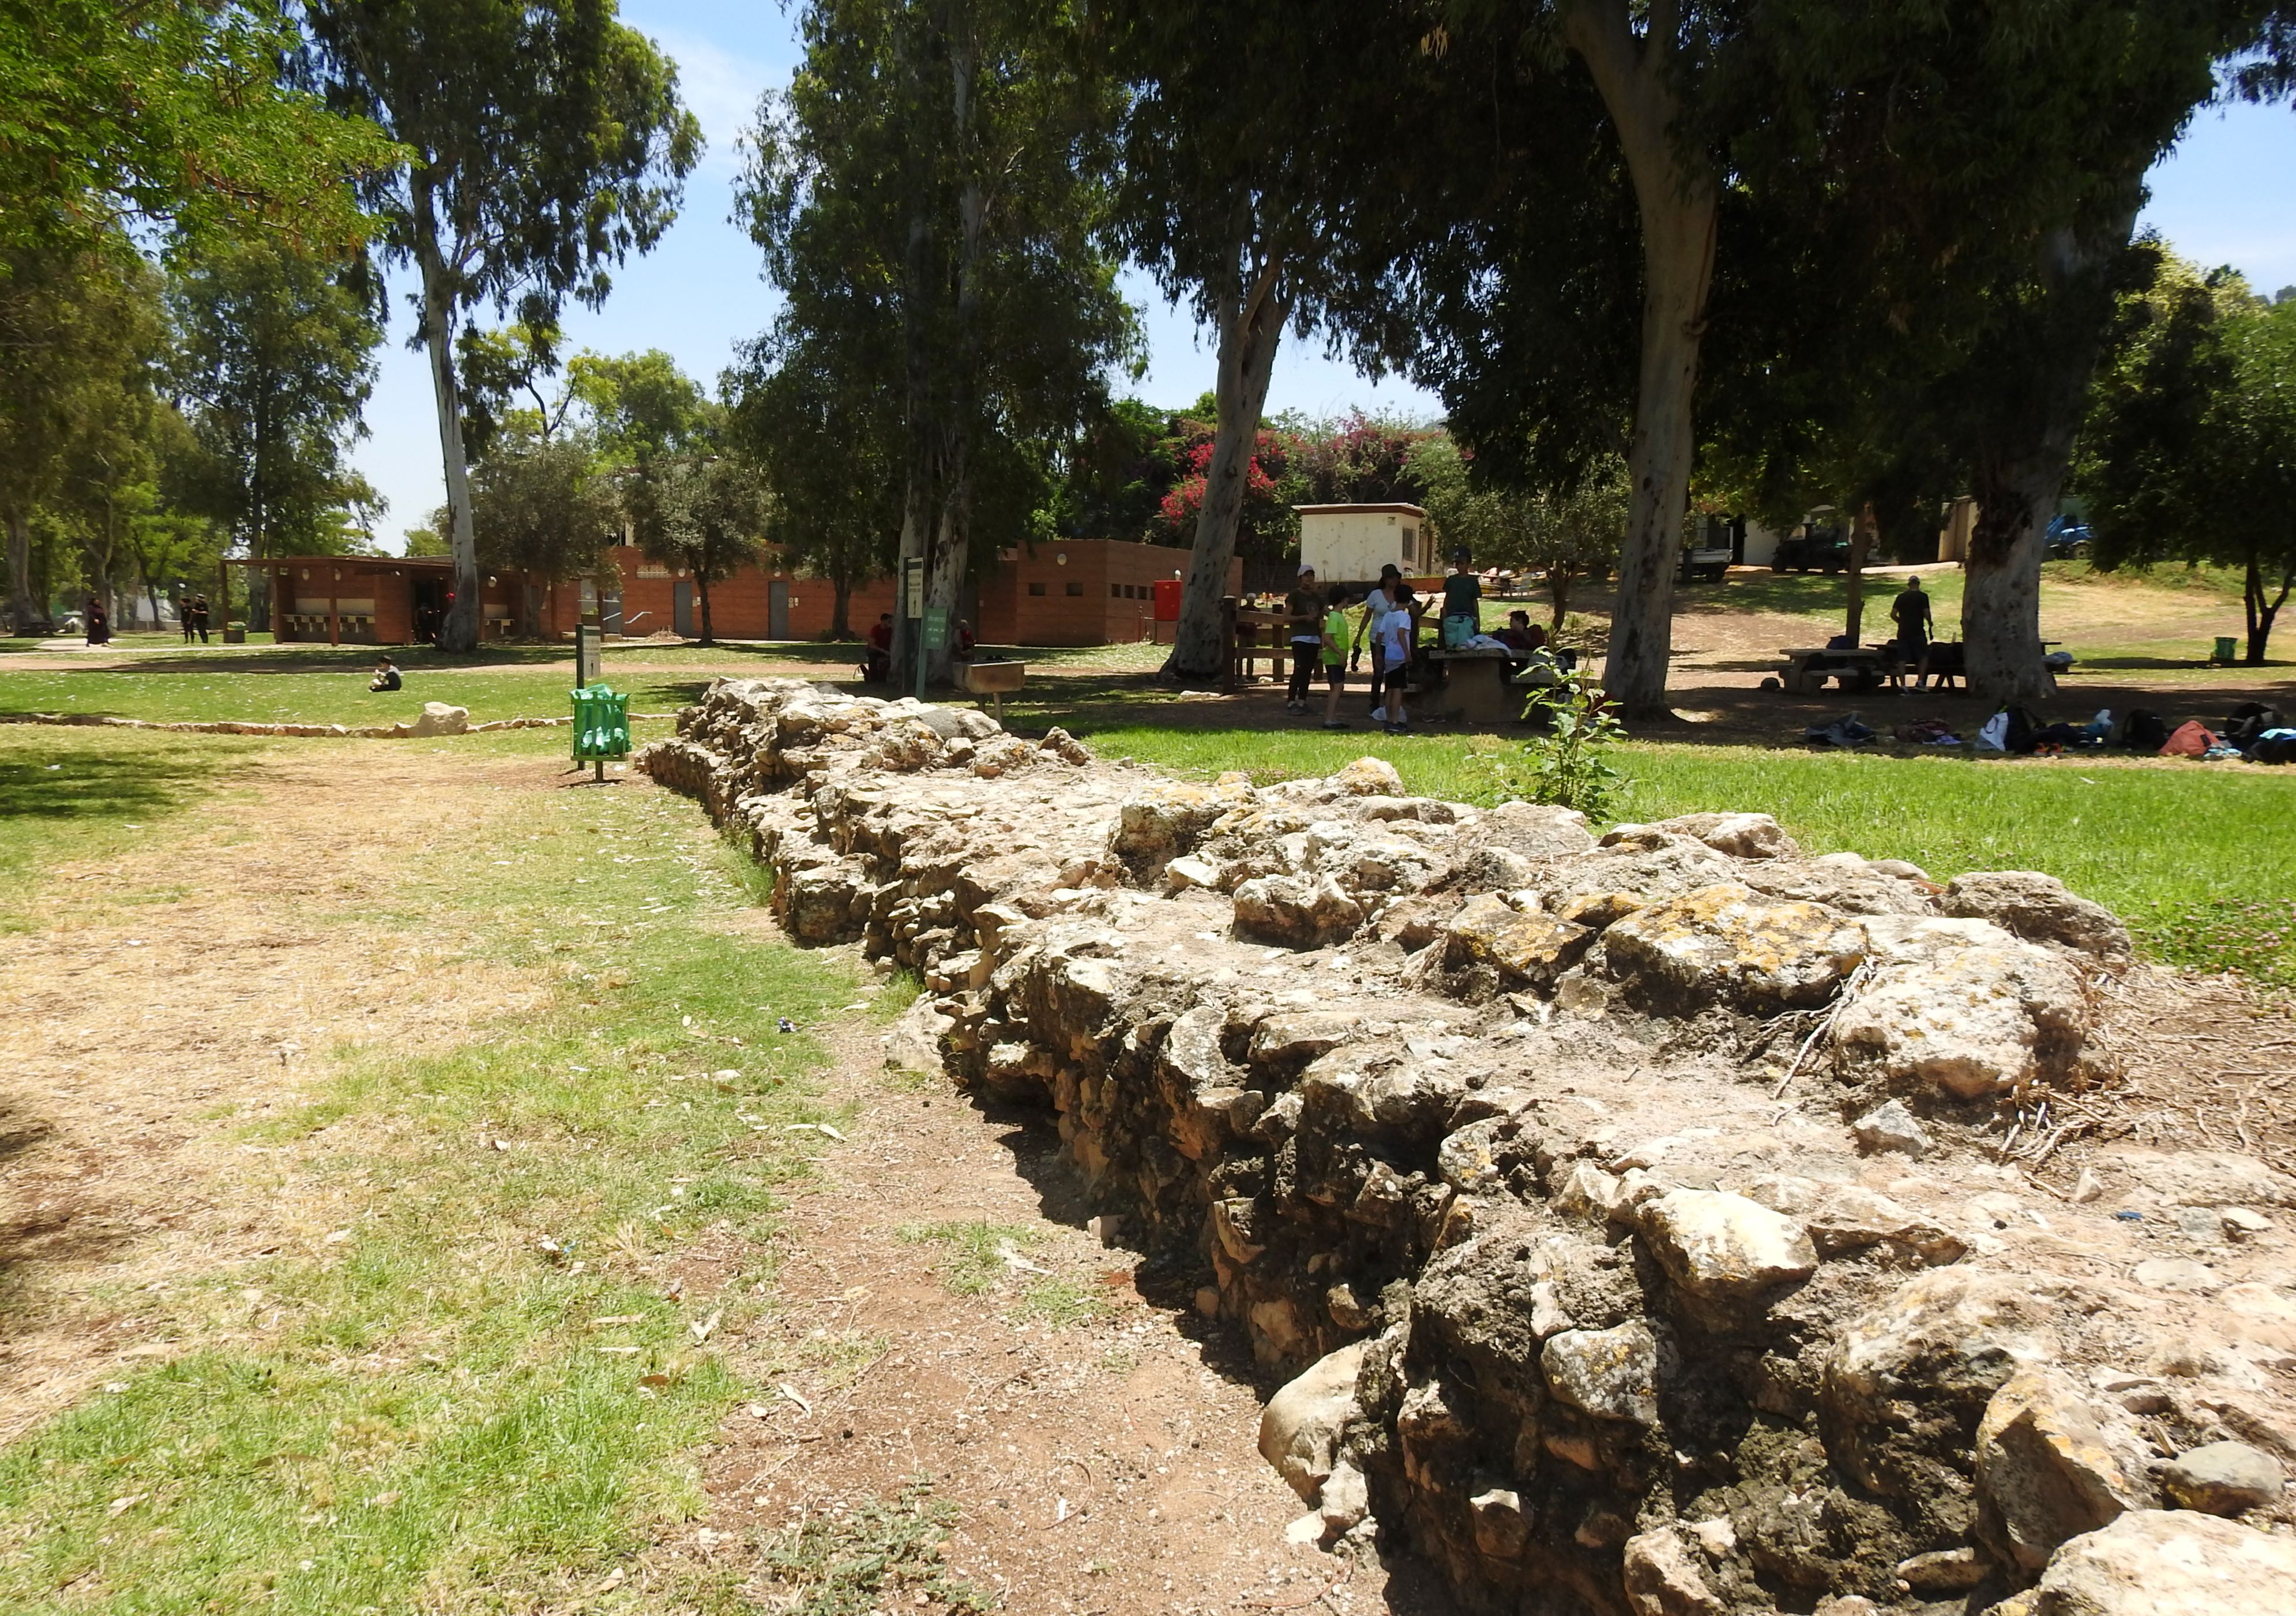 Remains of the ancient aqueduct